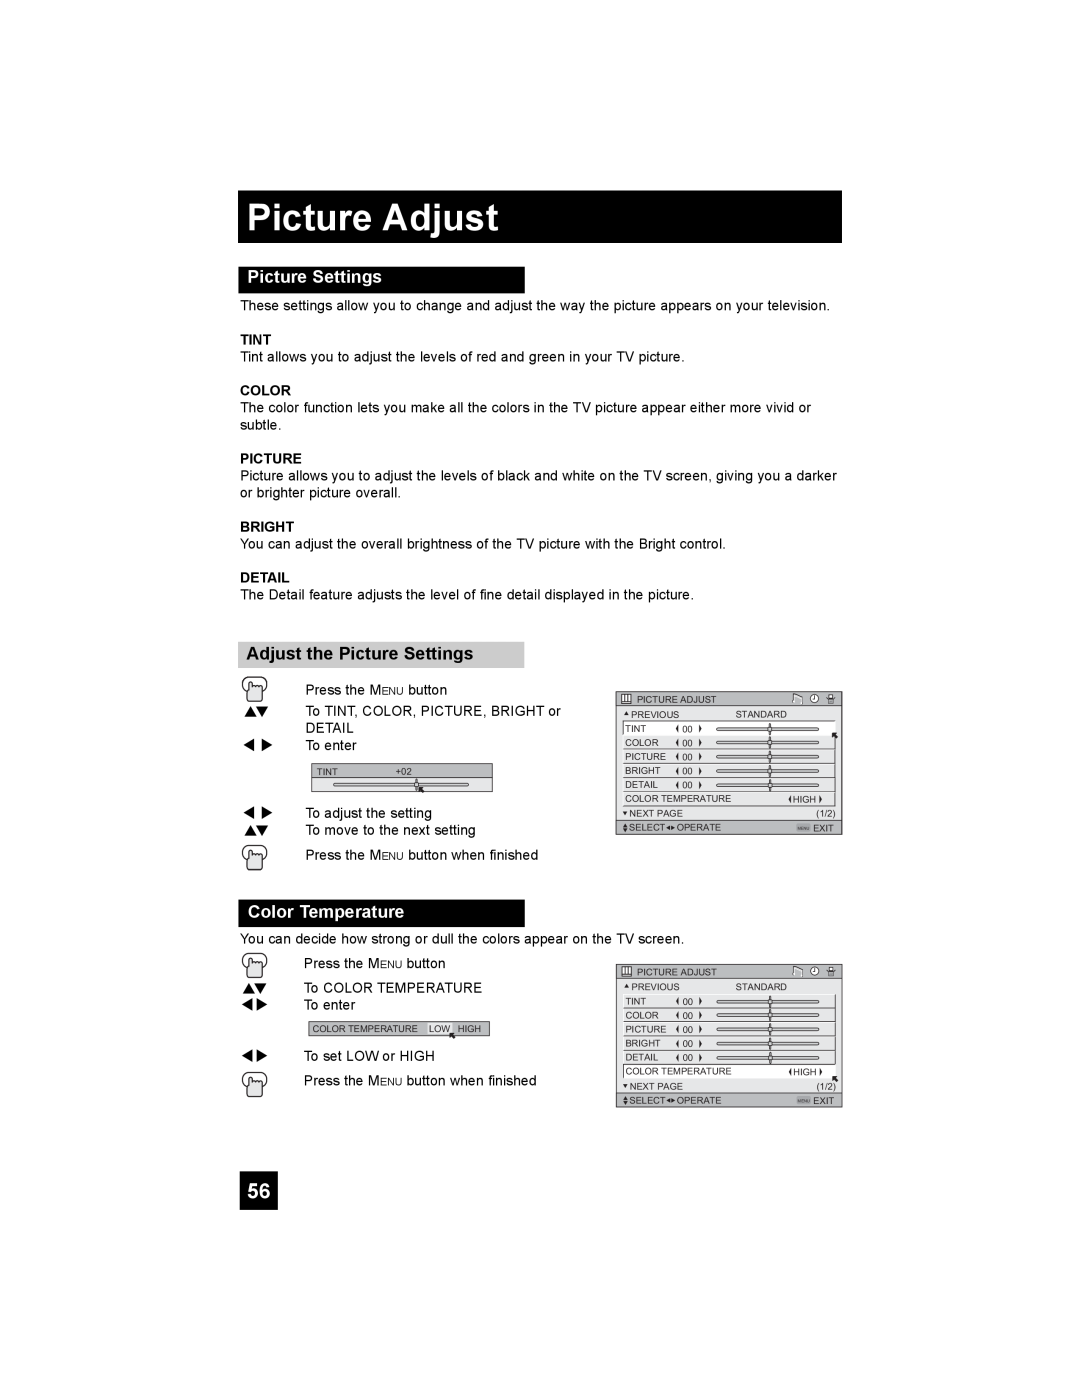 JVC PD-42X776 manual Picture Adjust, Adjust the Picture Settings, Color Temperature, Tint, Bright, Detail 